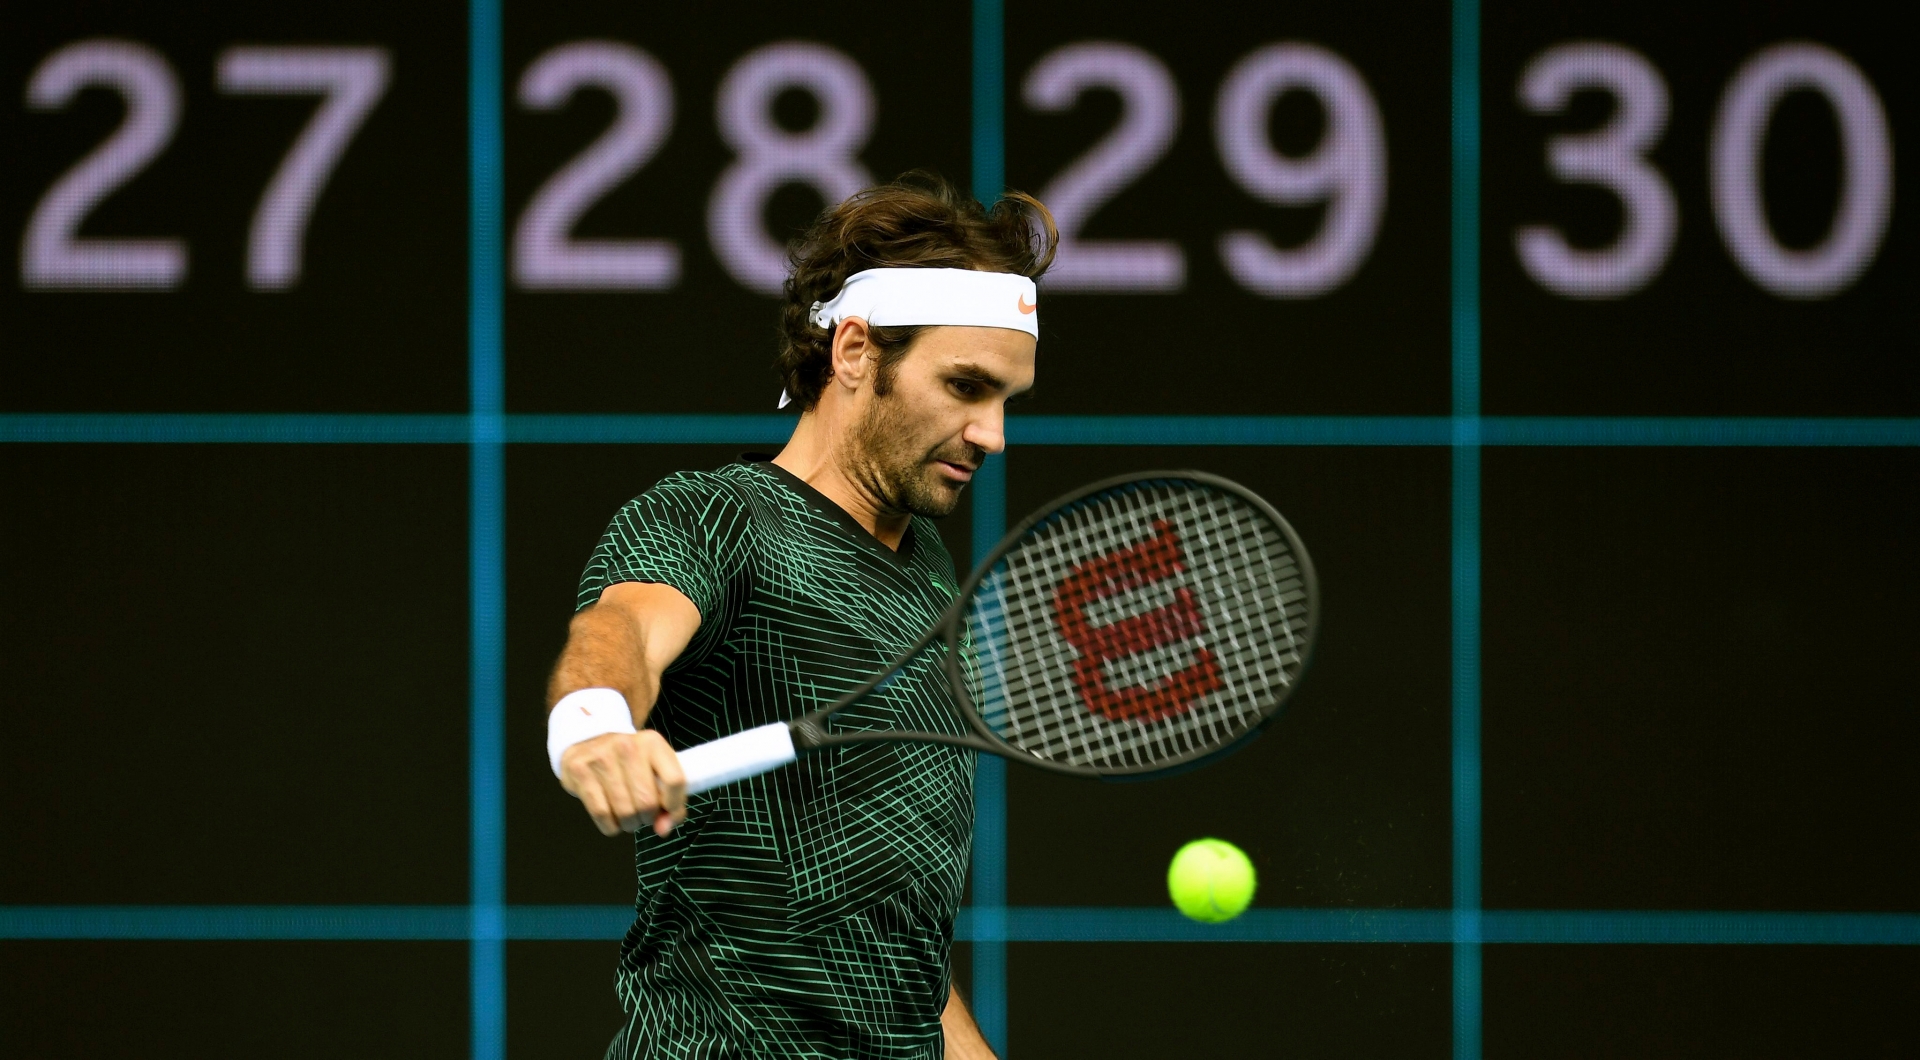 epa05706478 Roger Federer of Switzerland in action during a practice session ahead of the Australian Open tennis tournament on Rod Laver Arena in Melbourne, Victoria, Australia, 09 January 2017. The Australian Open starts on 16 January.  EPA/JULIAN SMITH  AUSTRALIA AND NEW ZEALAND OUT AUSTRALIA TENNIS AUSTRALIAN OPEN GRAND SLAM